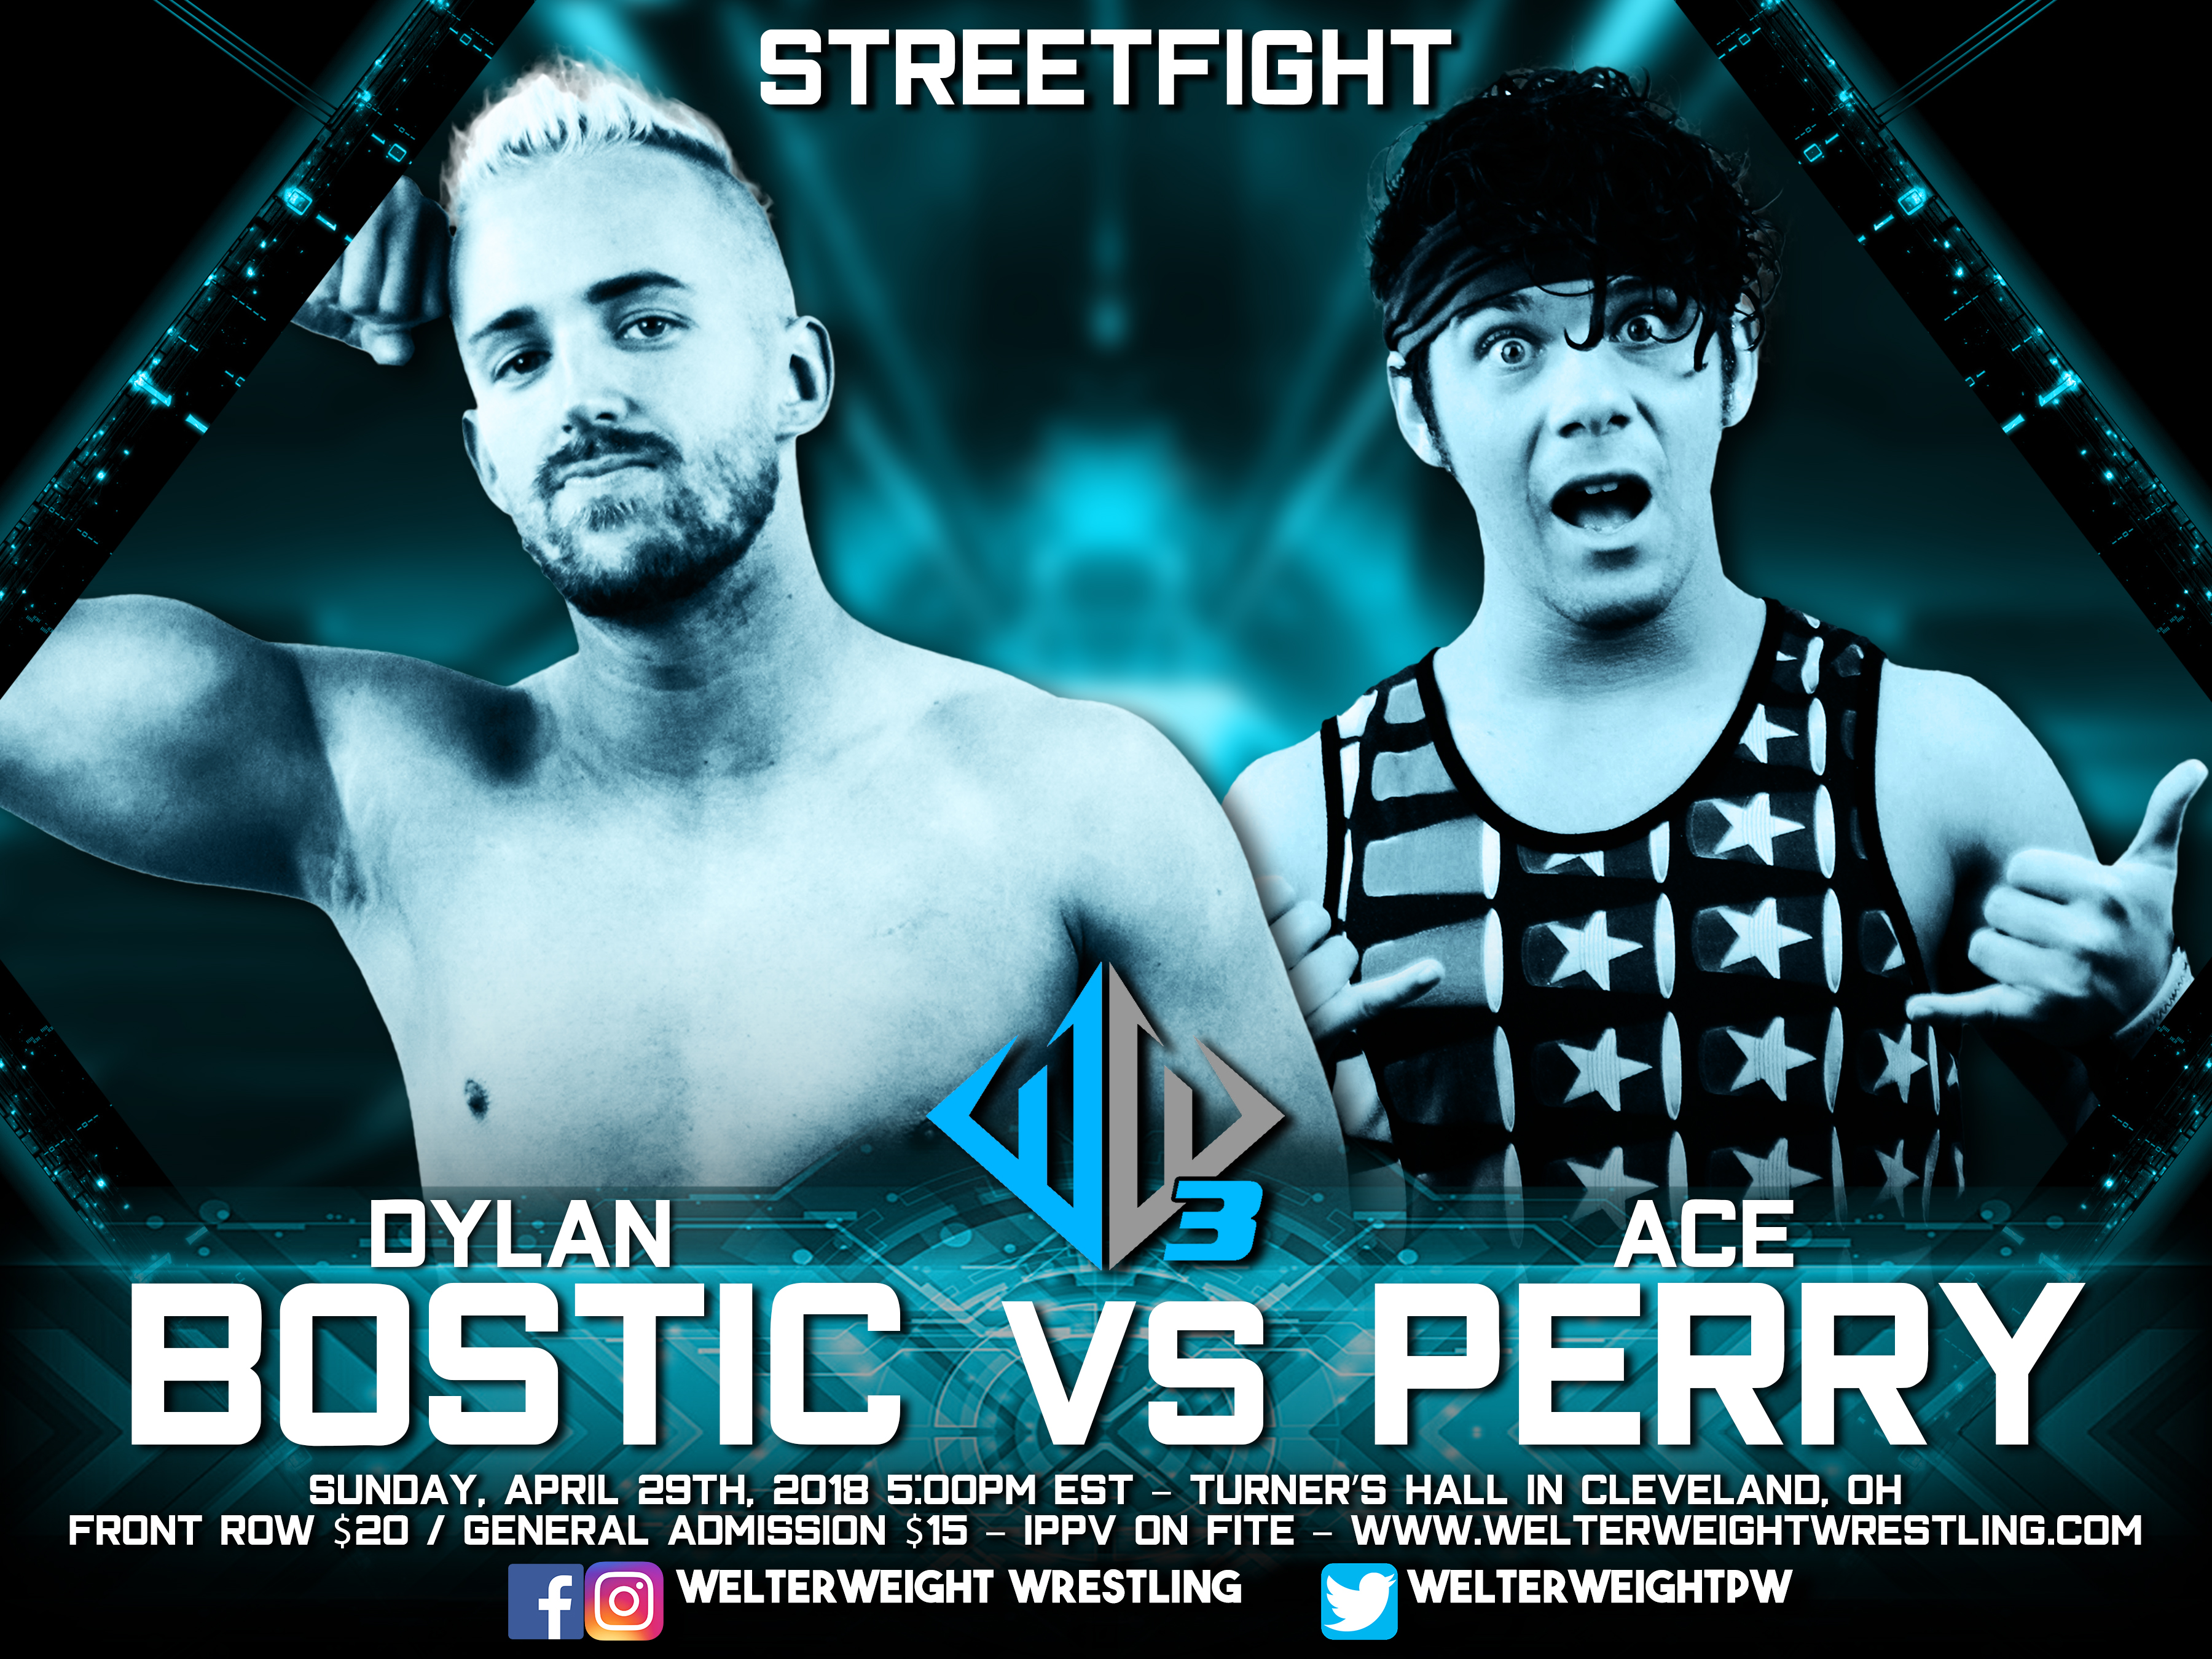 Dylan Bostic vs Ace Perry